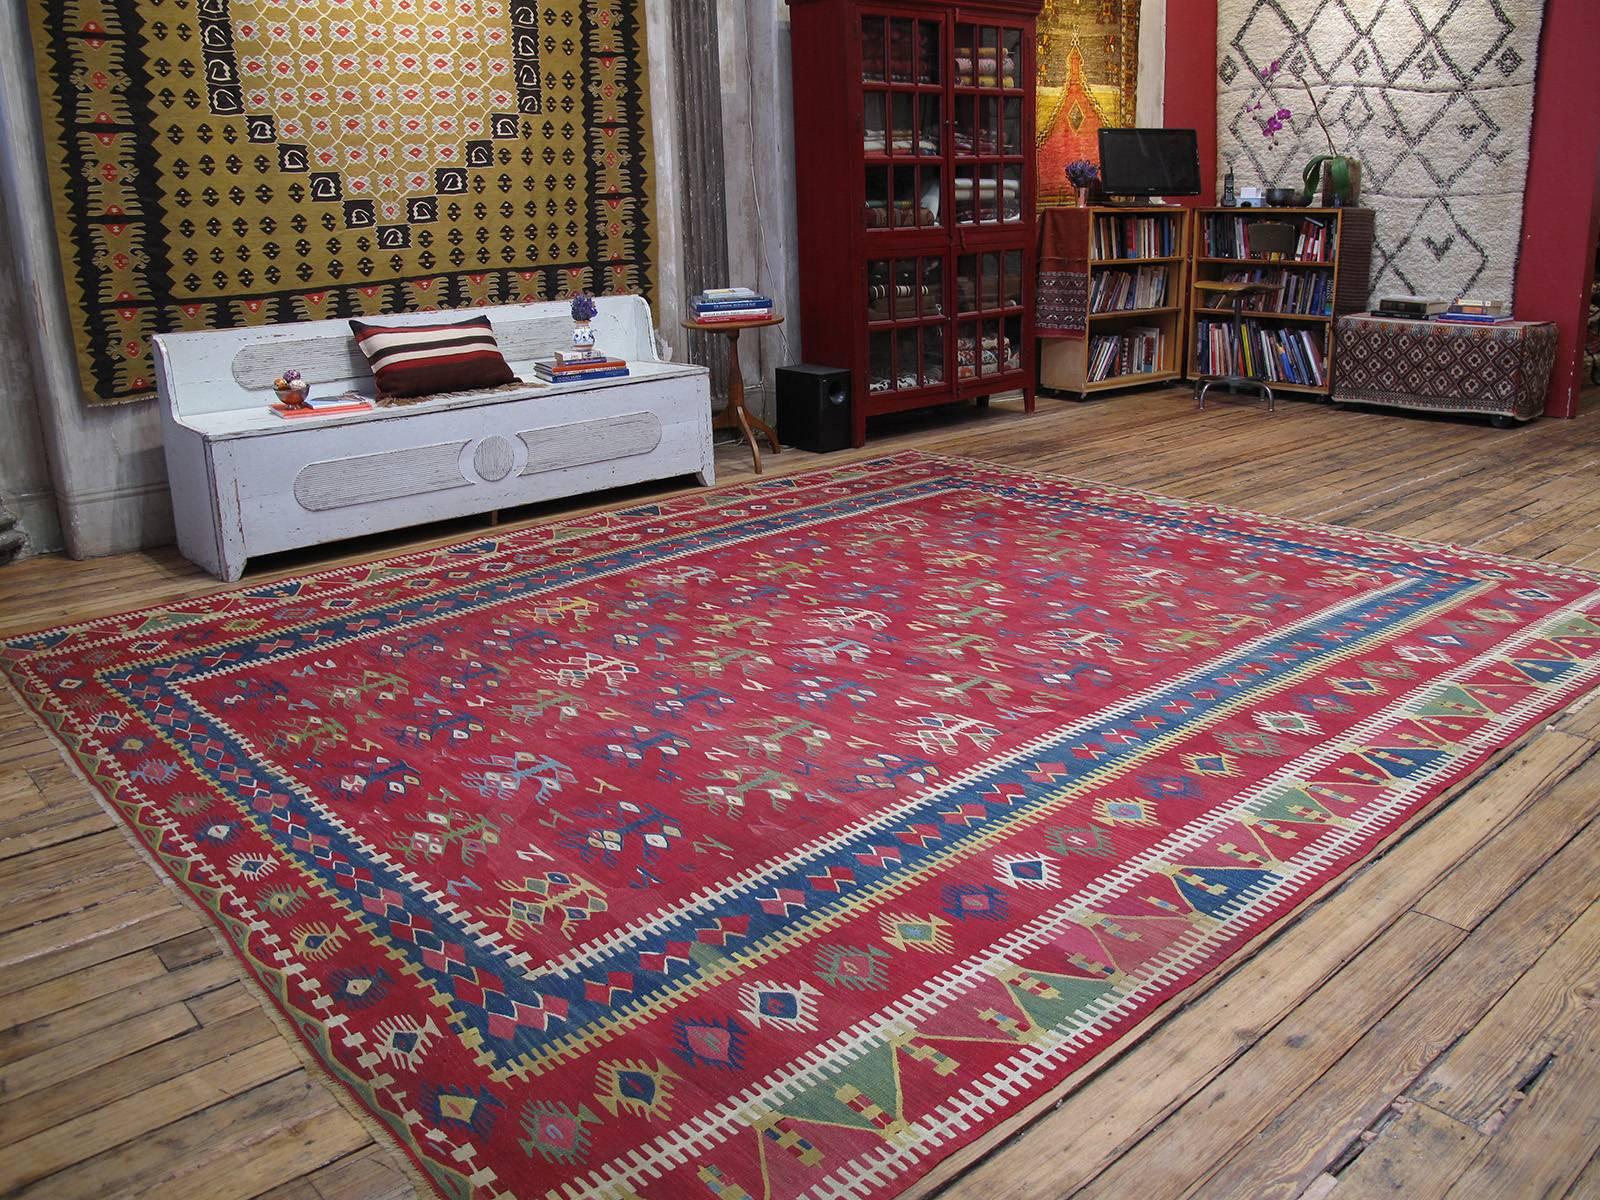 Antique Sharkoy Kilim rug. A finely woven antique kilim rug from the border region between present day Serbia and Bulgaria, centered around the town of Pirot (called Sharkoy by Turks). Once part of the Ottoman Empire, this area has a centuries-old